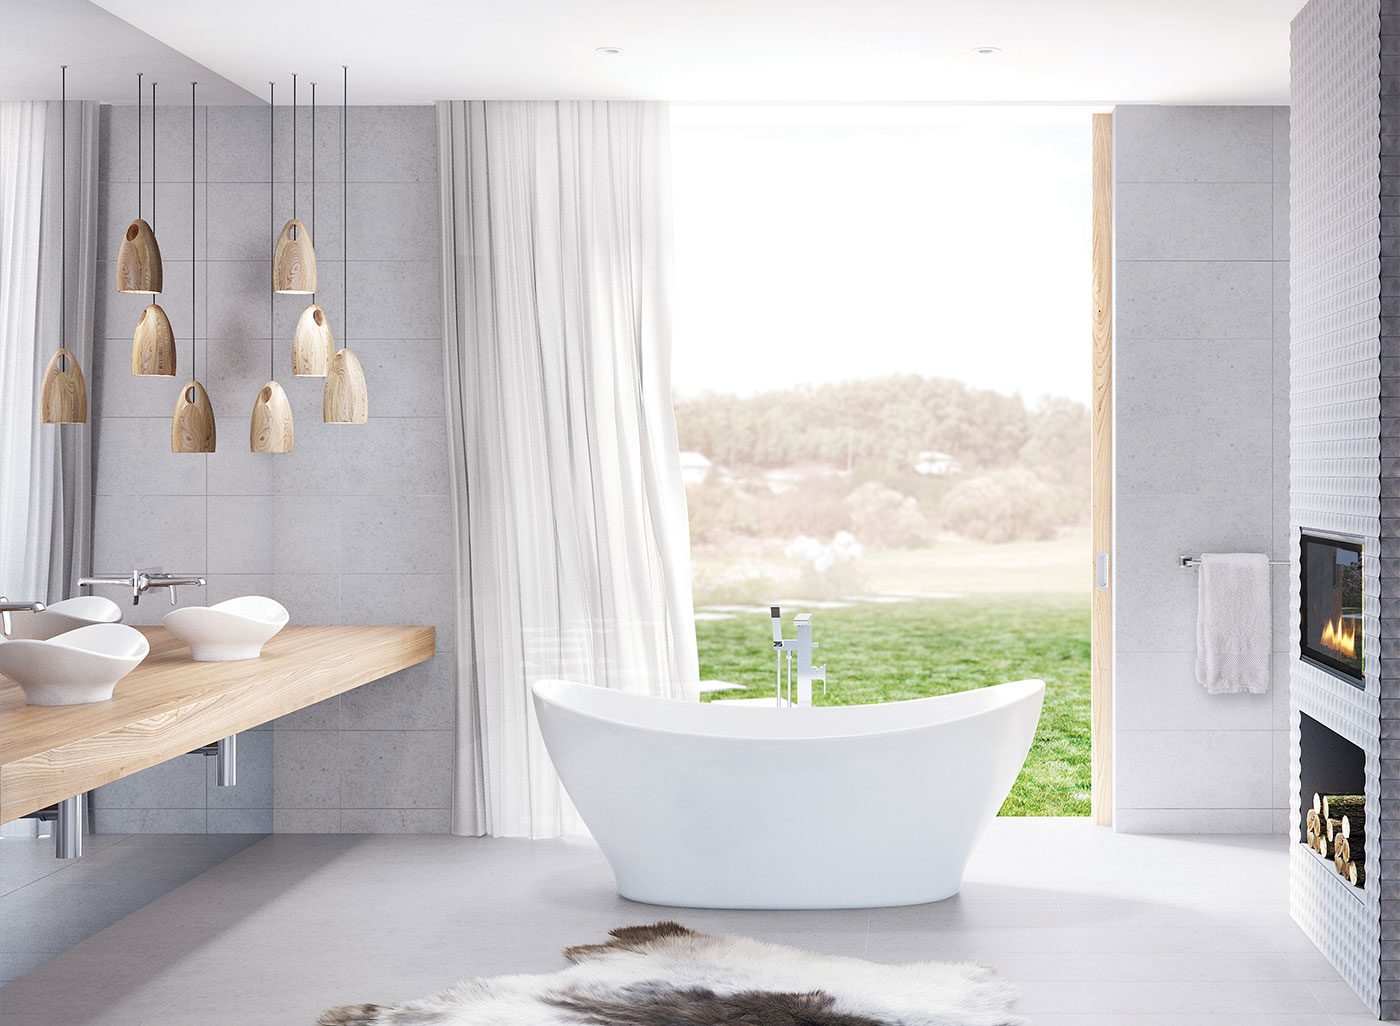 it's curved vessel design provides a sculptural element to your bathroom.